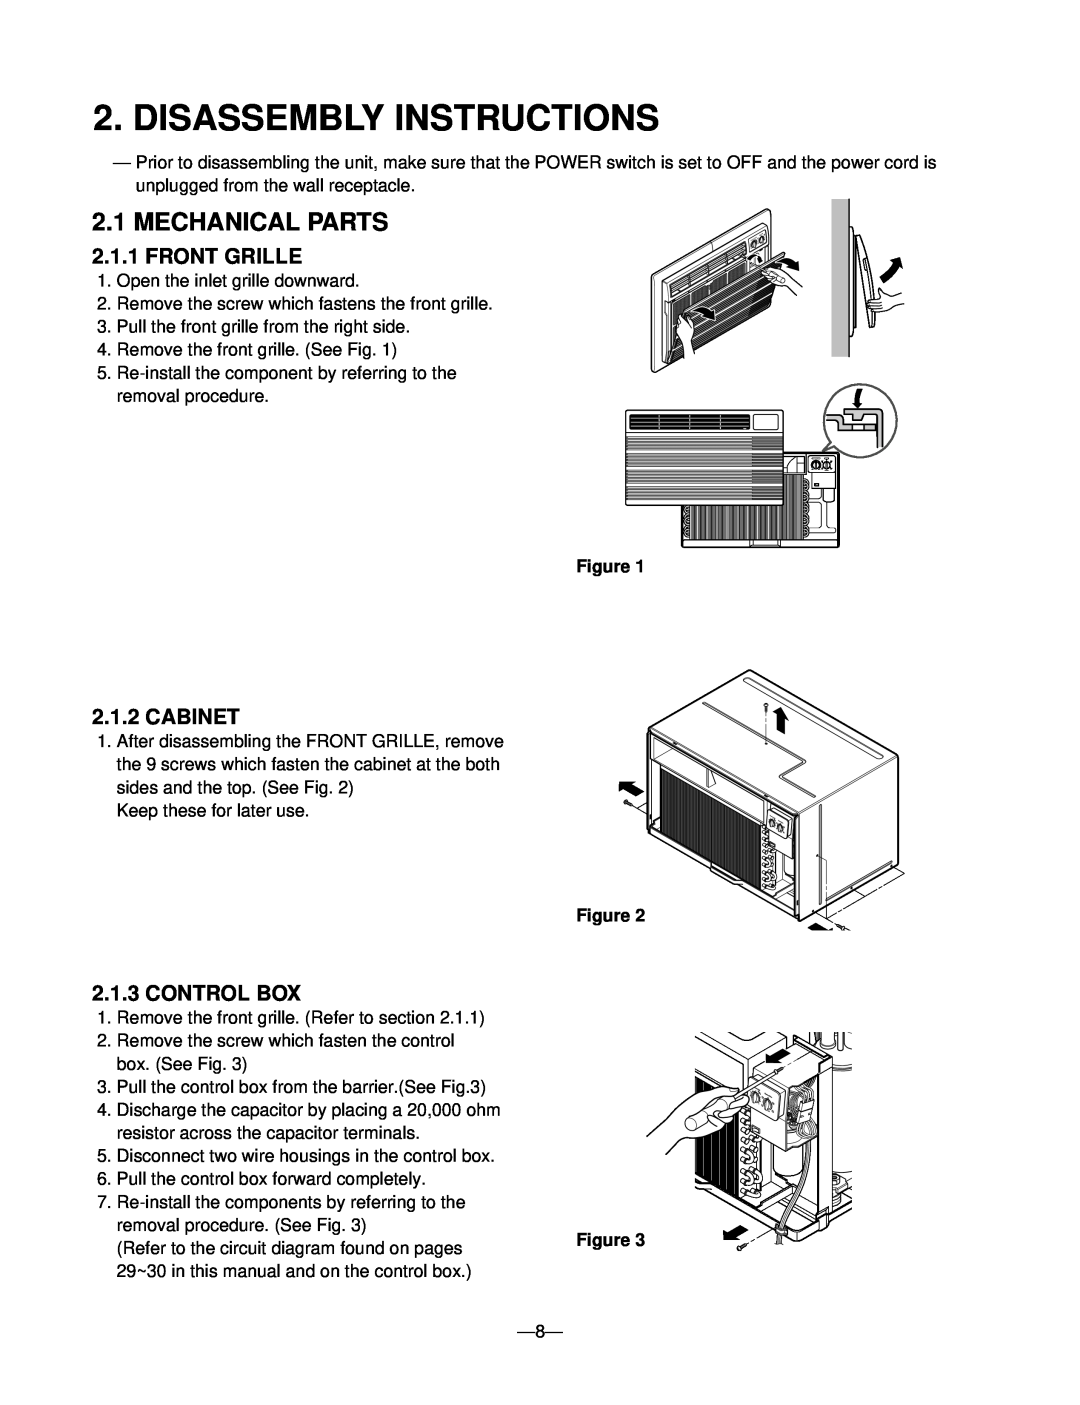 Heat Controller BDE-123, BD-101, BD-123 manual Disassembly Instructions, Mechanical Parts, Front Grille, Cabinet, Control Box 